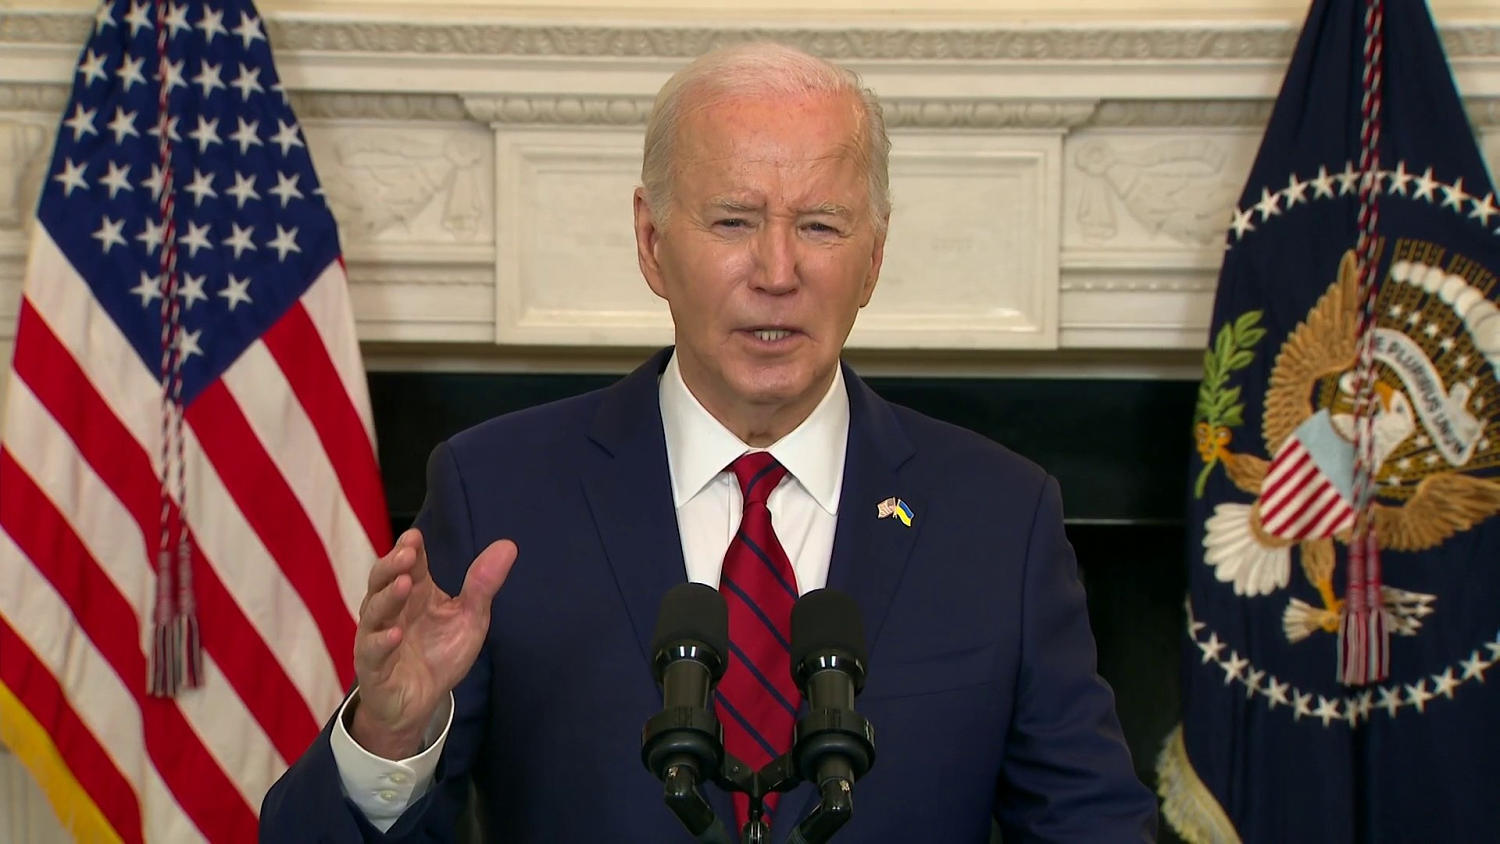 Biden: Foreign aid package will 'make the world safer'